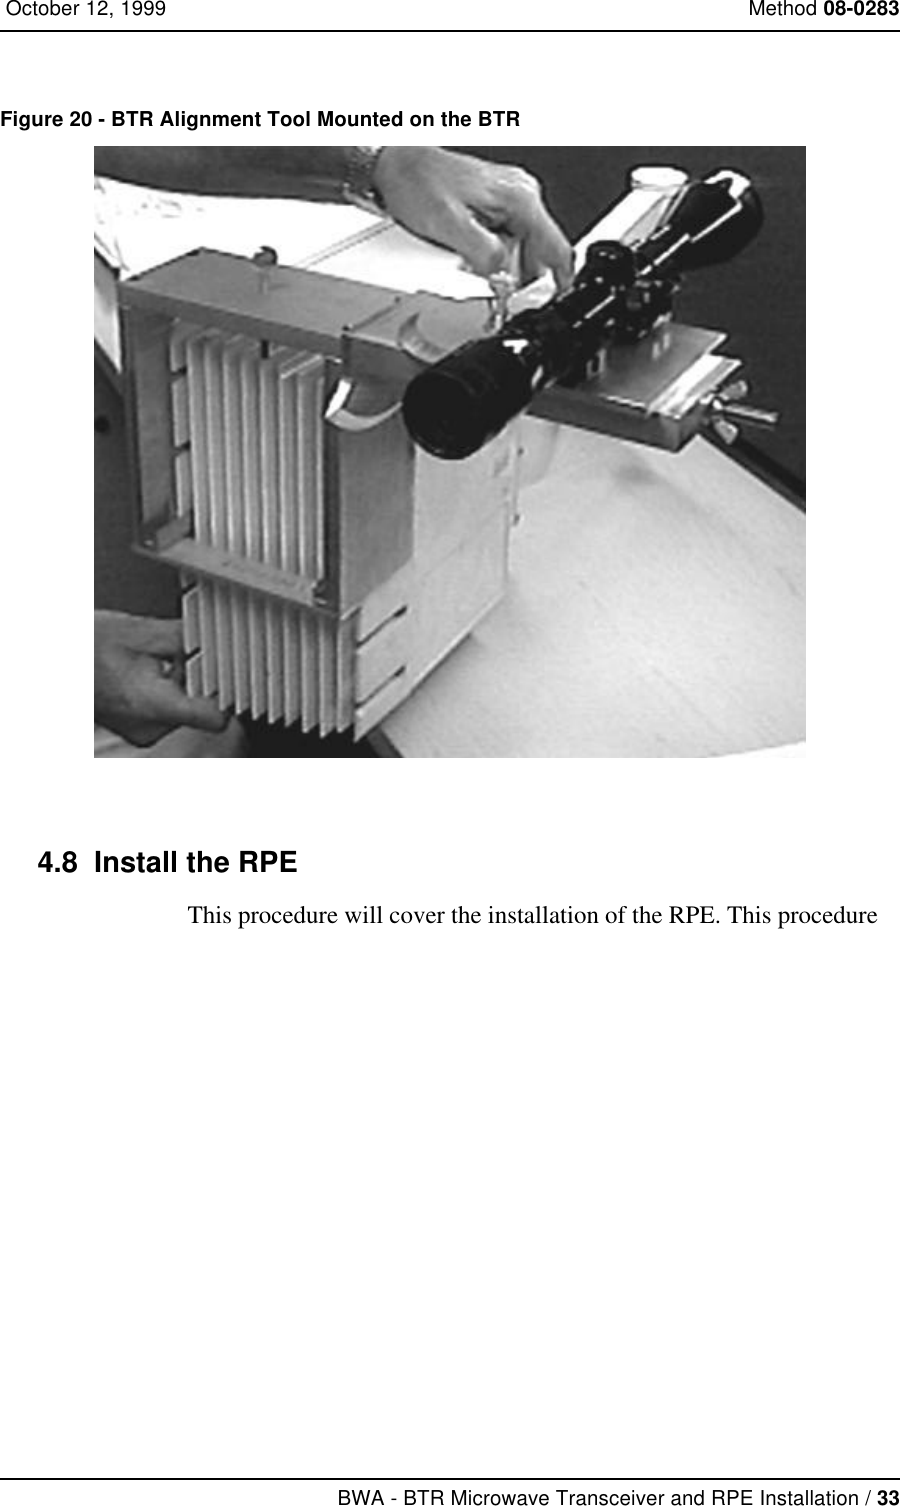 BWA - BTR Microwave Transceiver and RPE Installation / 33 October 12, 1999 Method 08-0283Figure 20 - BTR Alignment Tool Mounted on the BTR4.8  Install the RPEThis procedure will cover the installation of the RPE. This procedure 